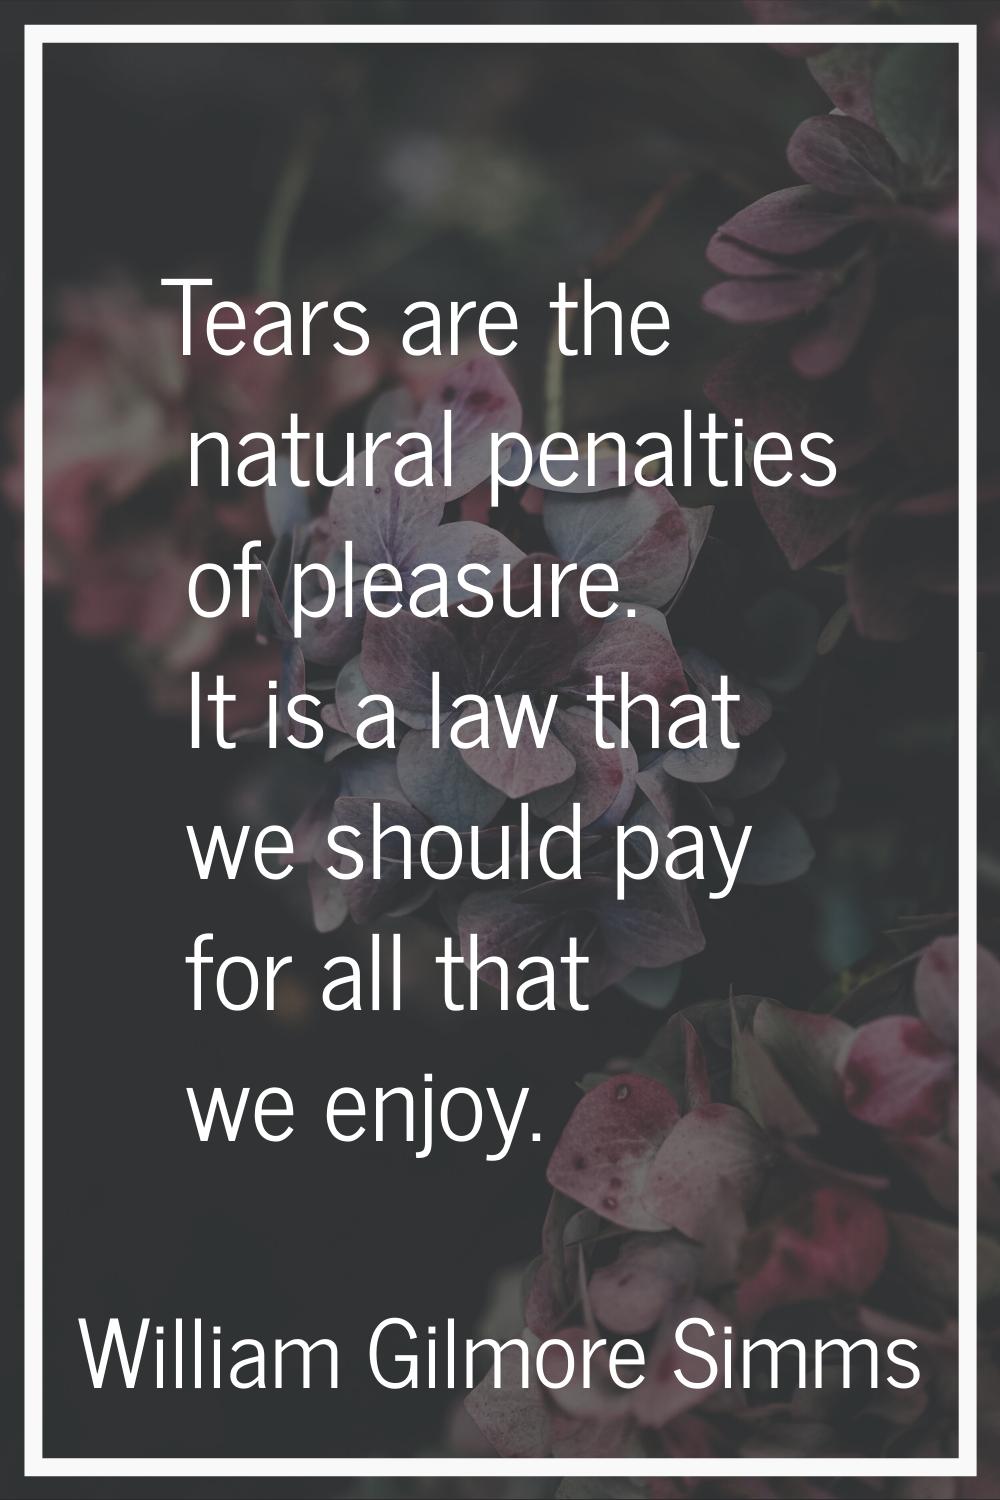 Tears are the natural penalties of pleasure. It is a law that we should pay for all that we enjoy.